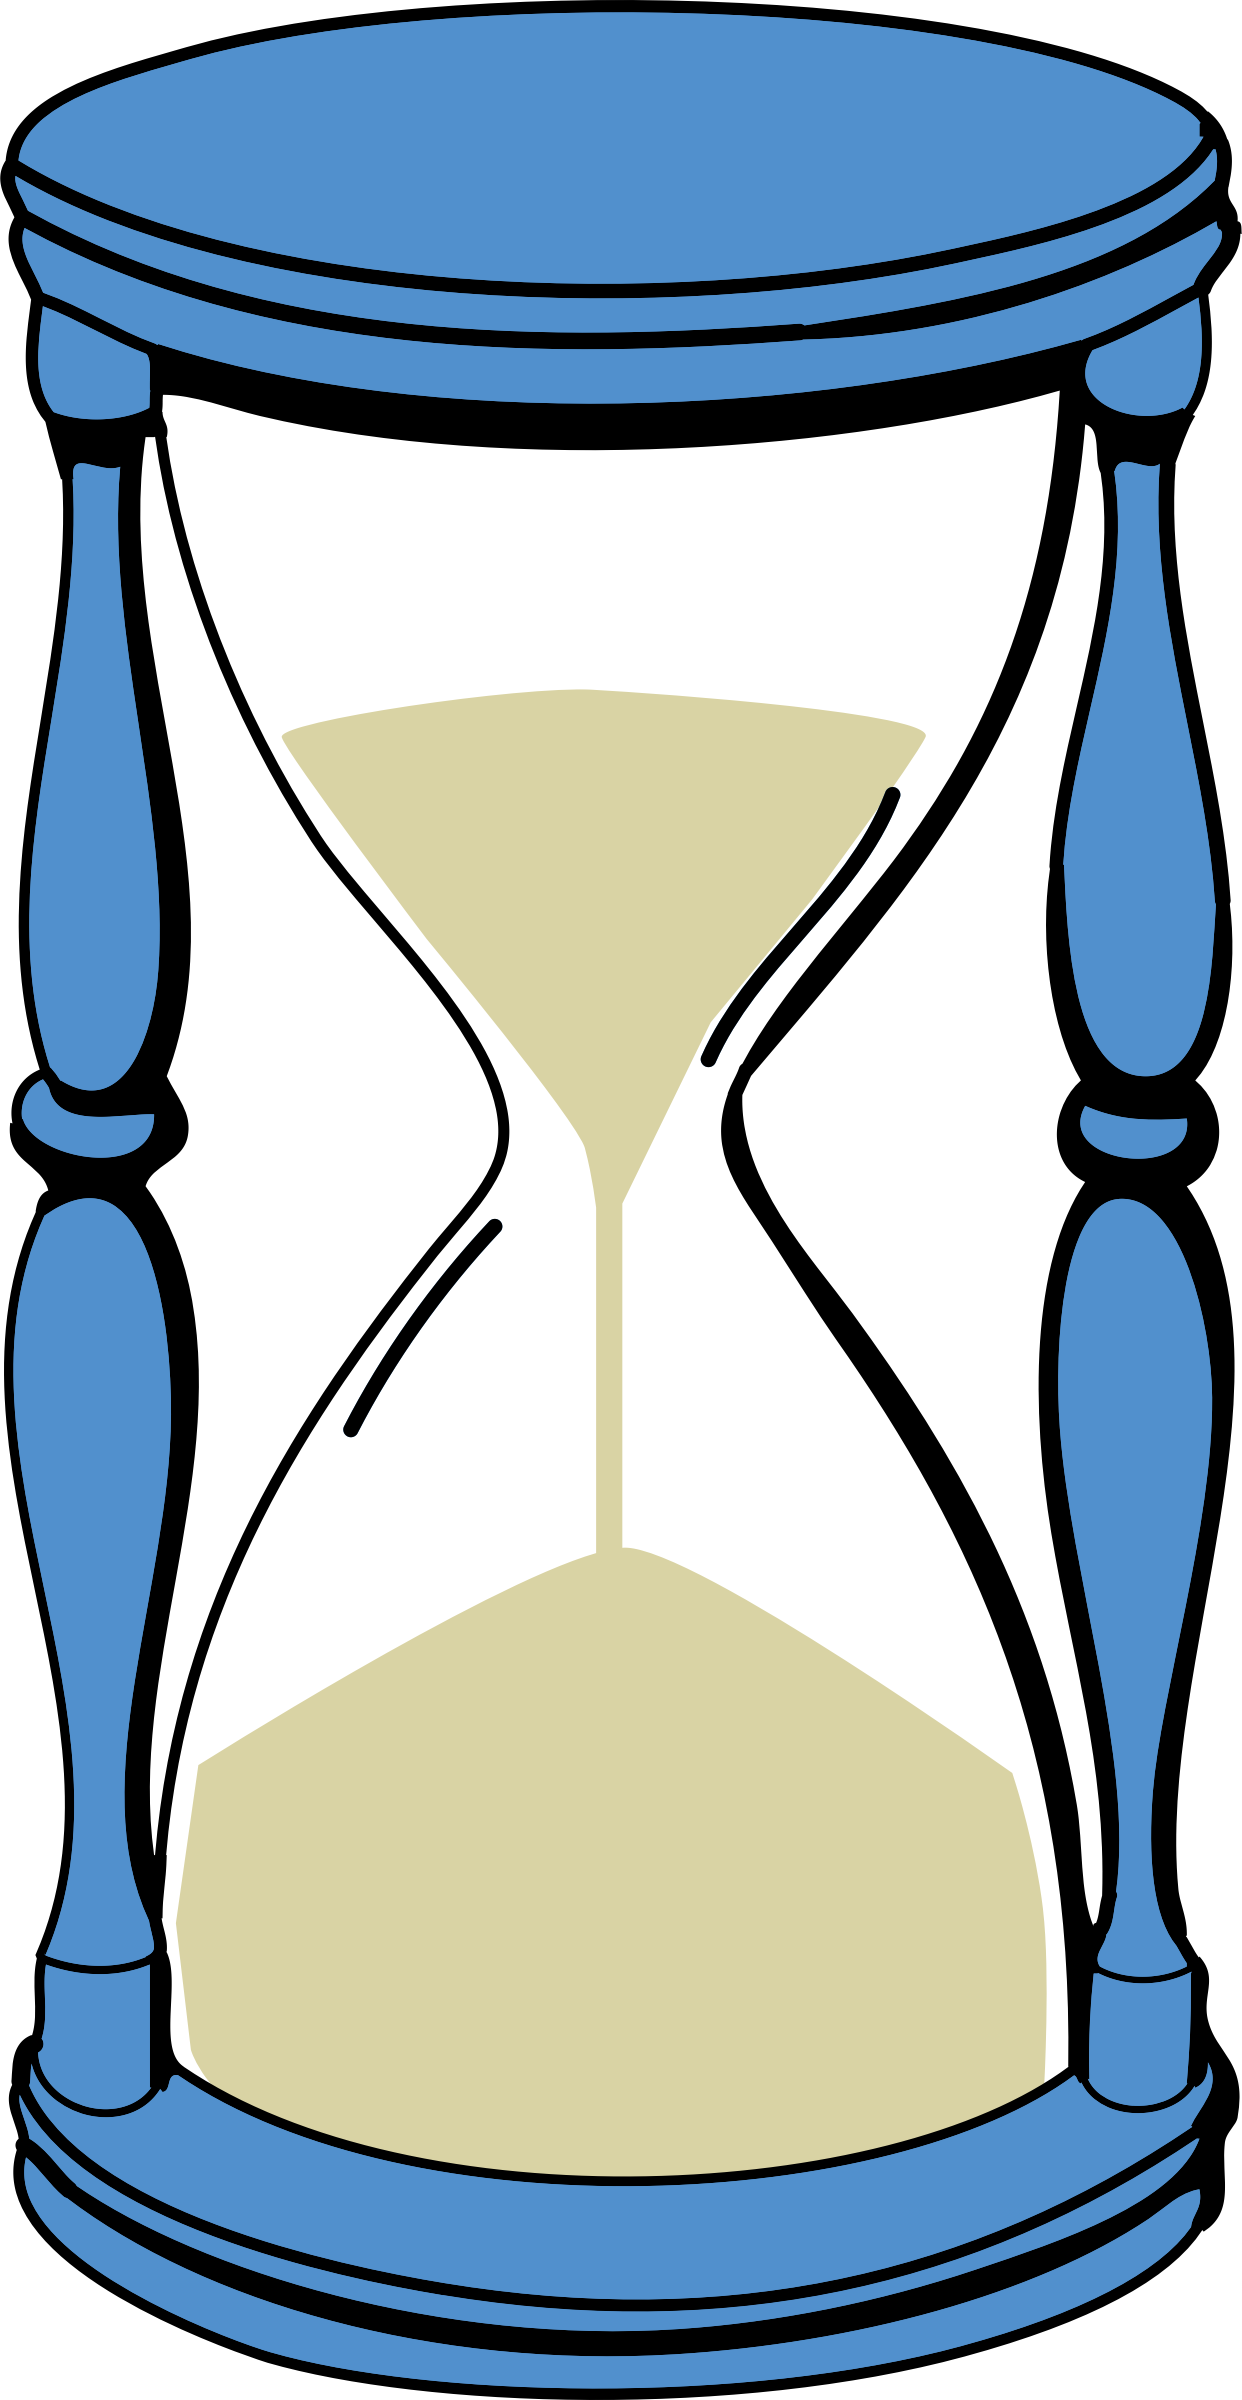 Sand Animated Hourglass PNG Clipart